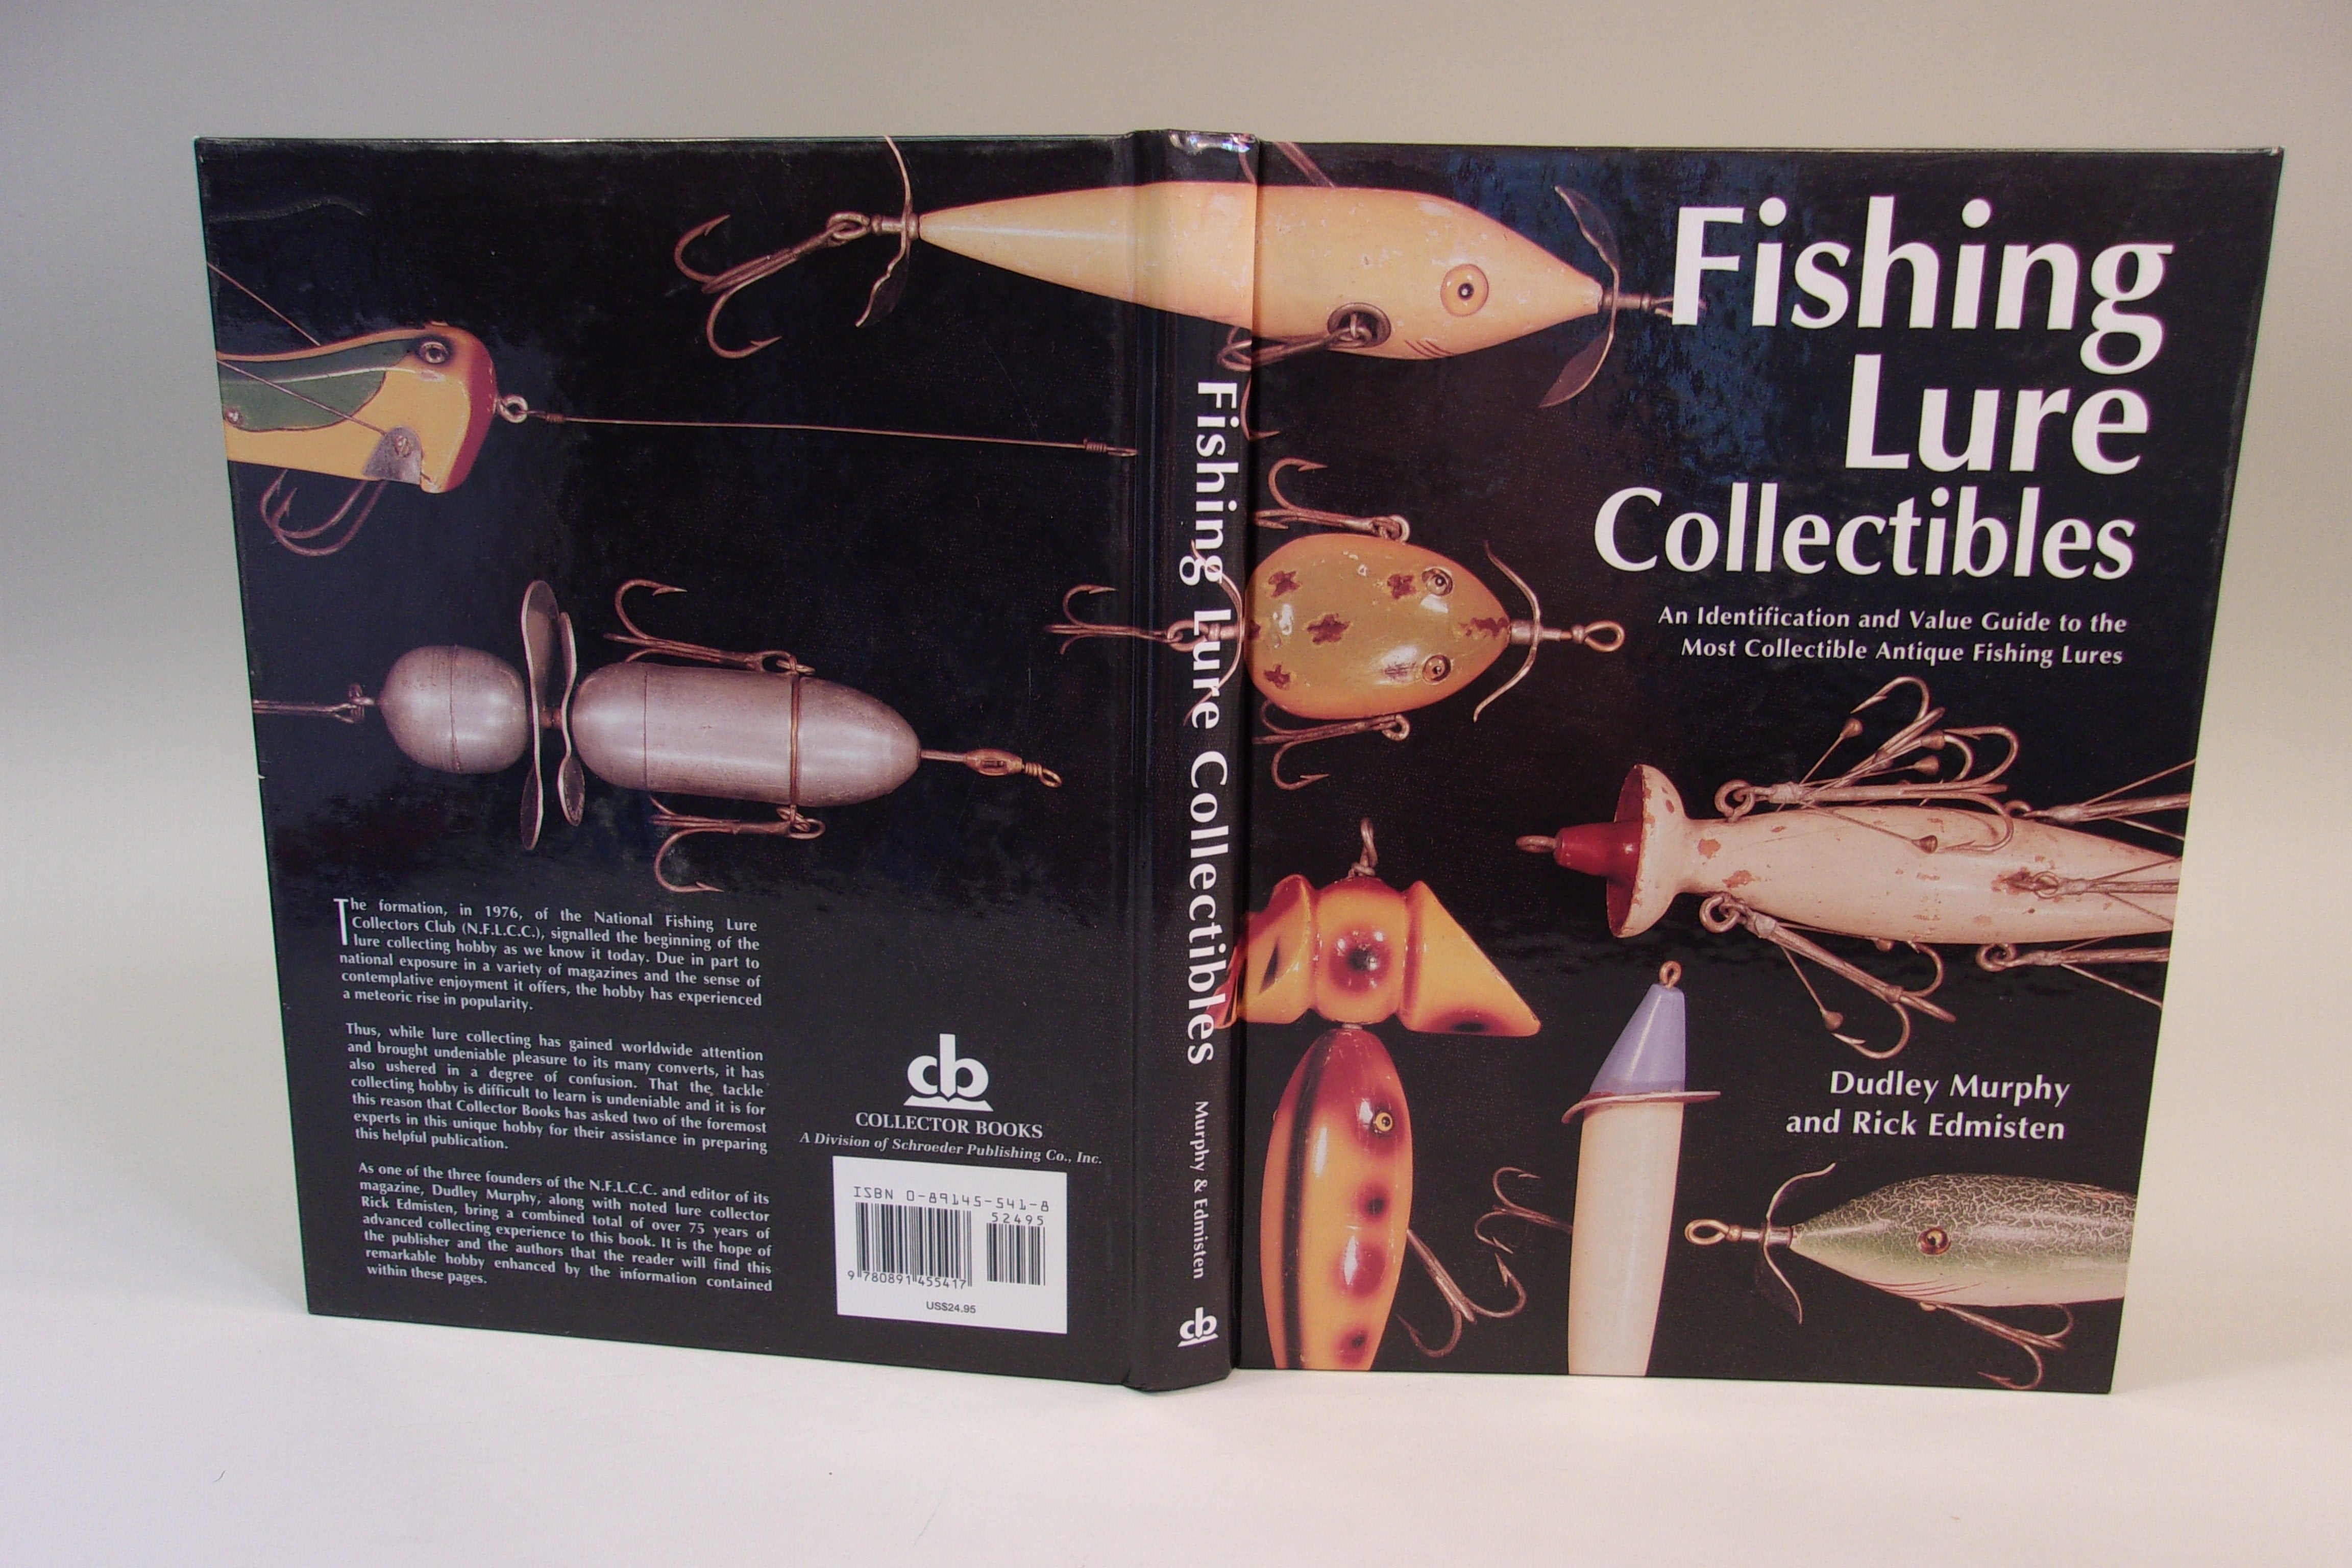 Old fishing lures and tackle: An identification and value guide